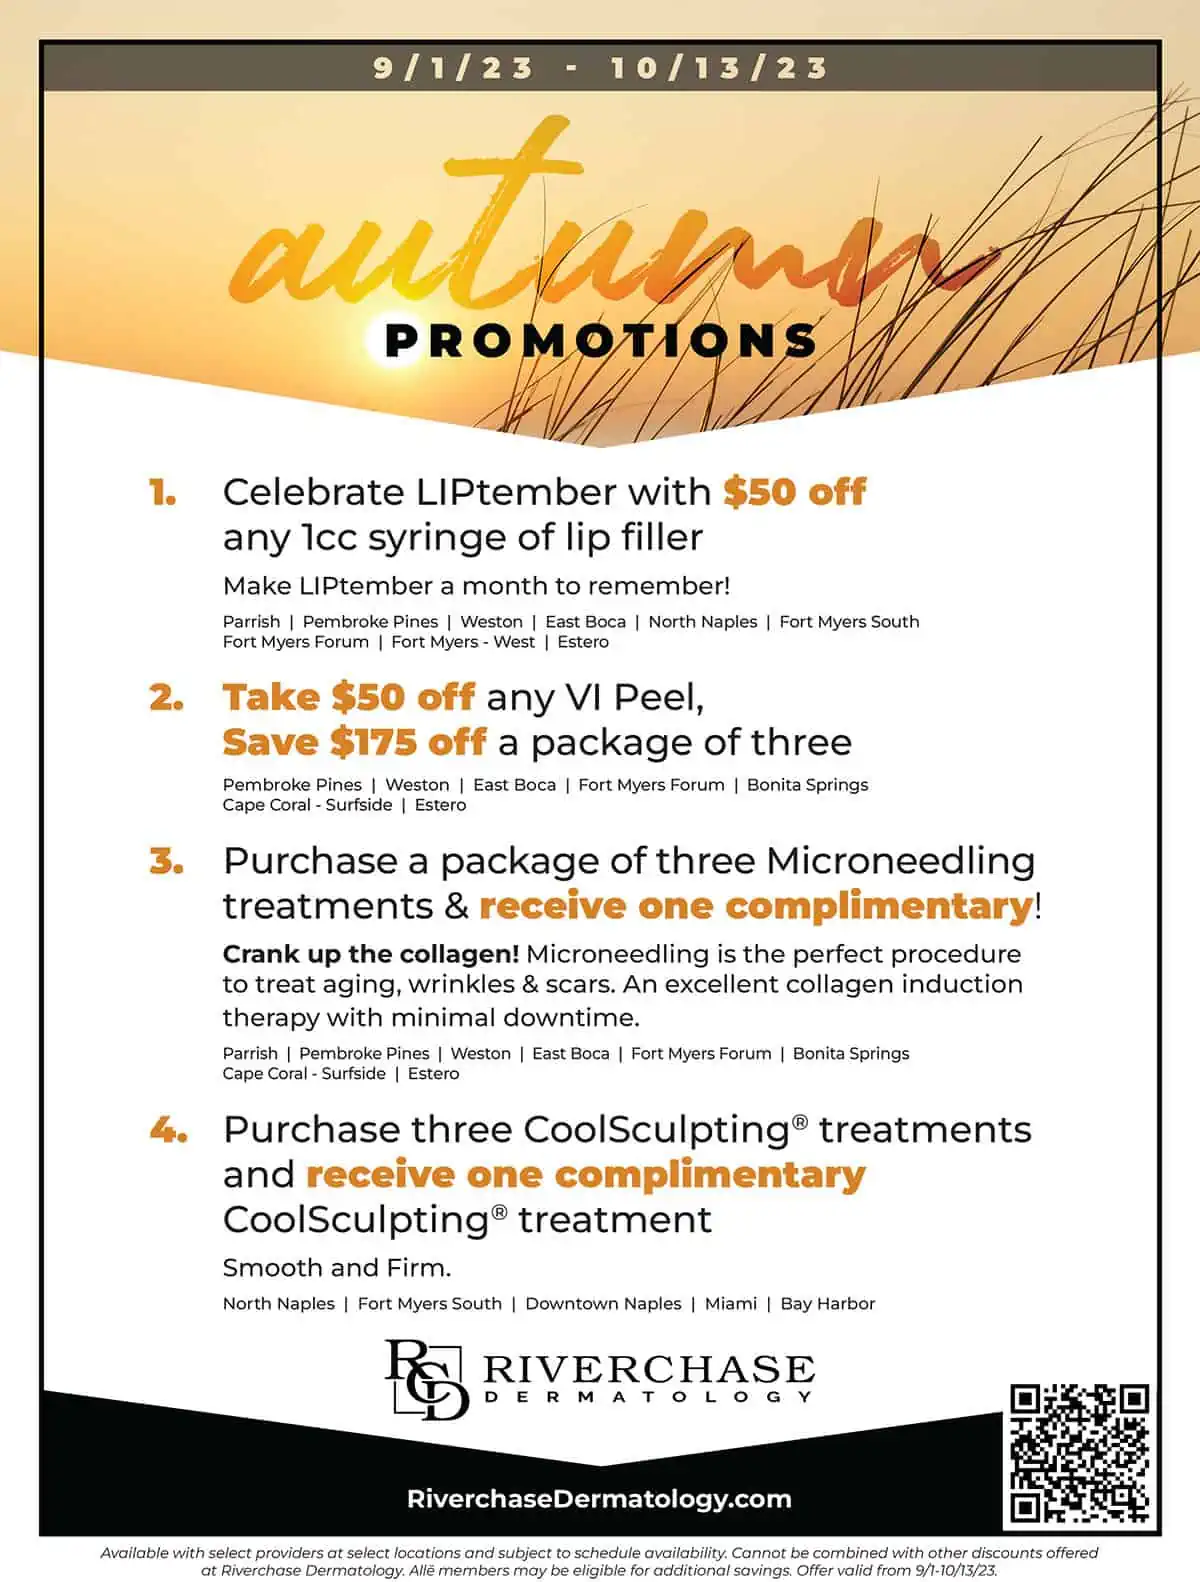 Monthly promotions